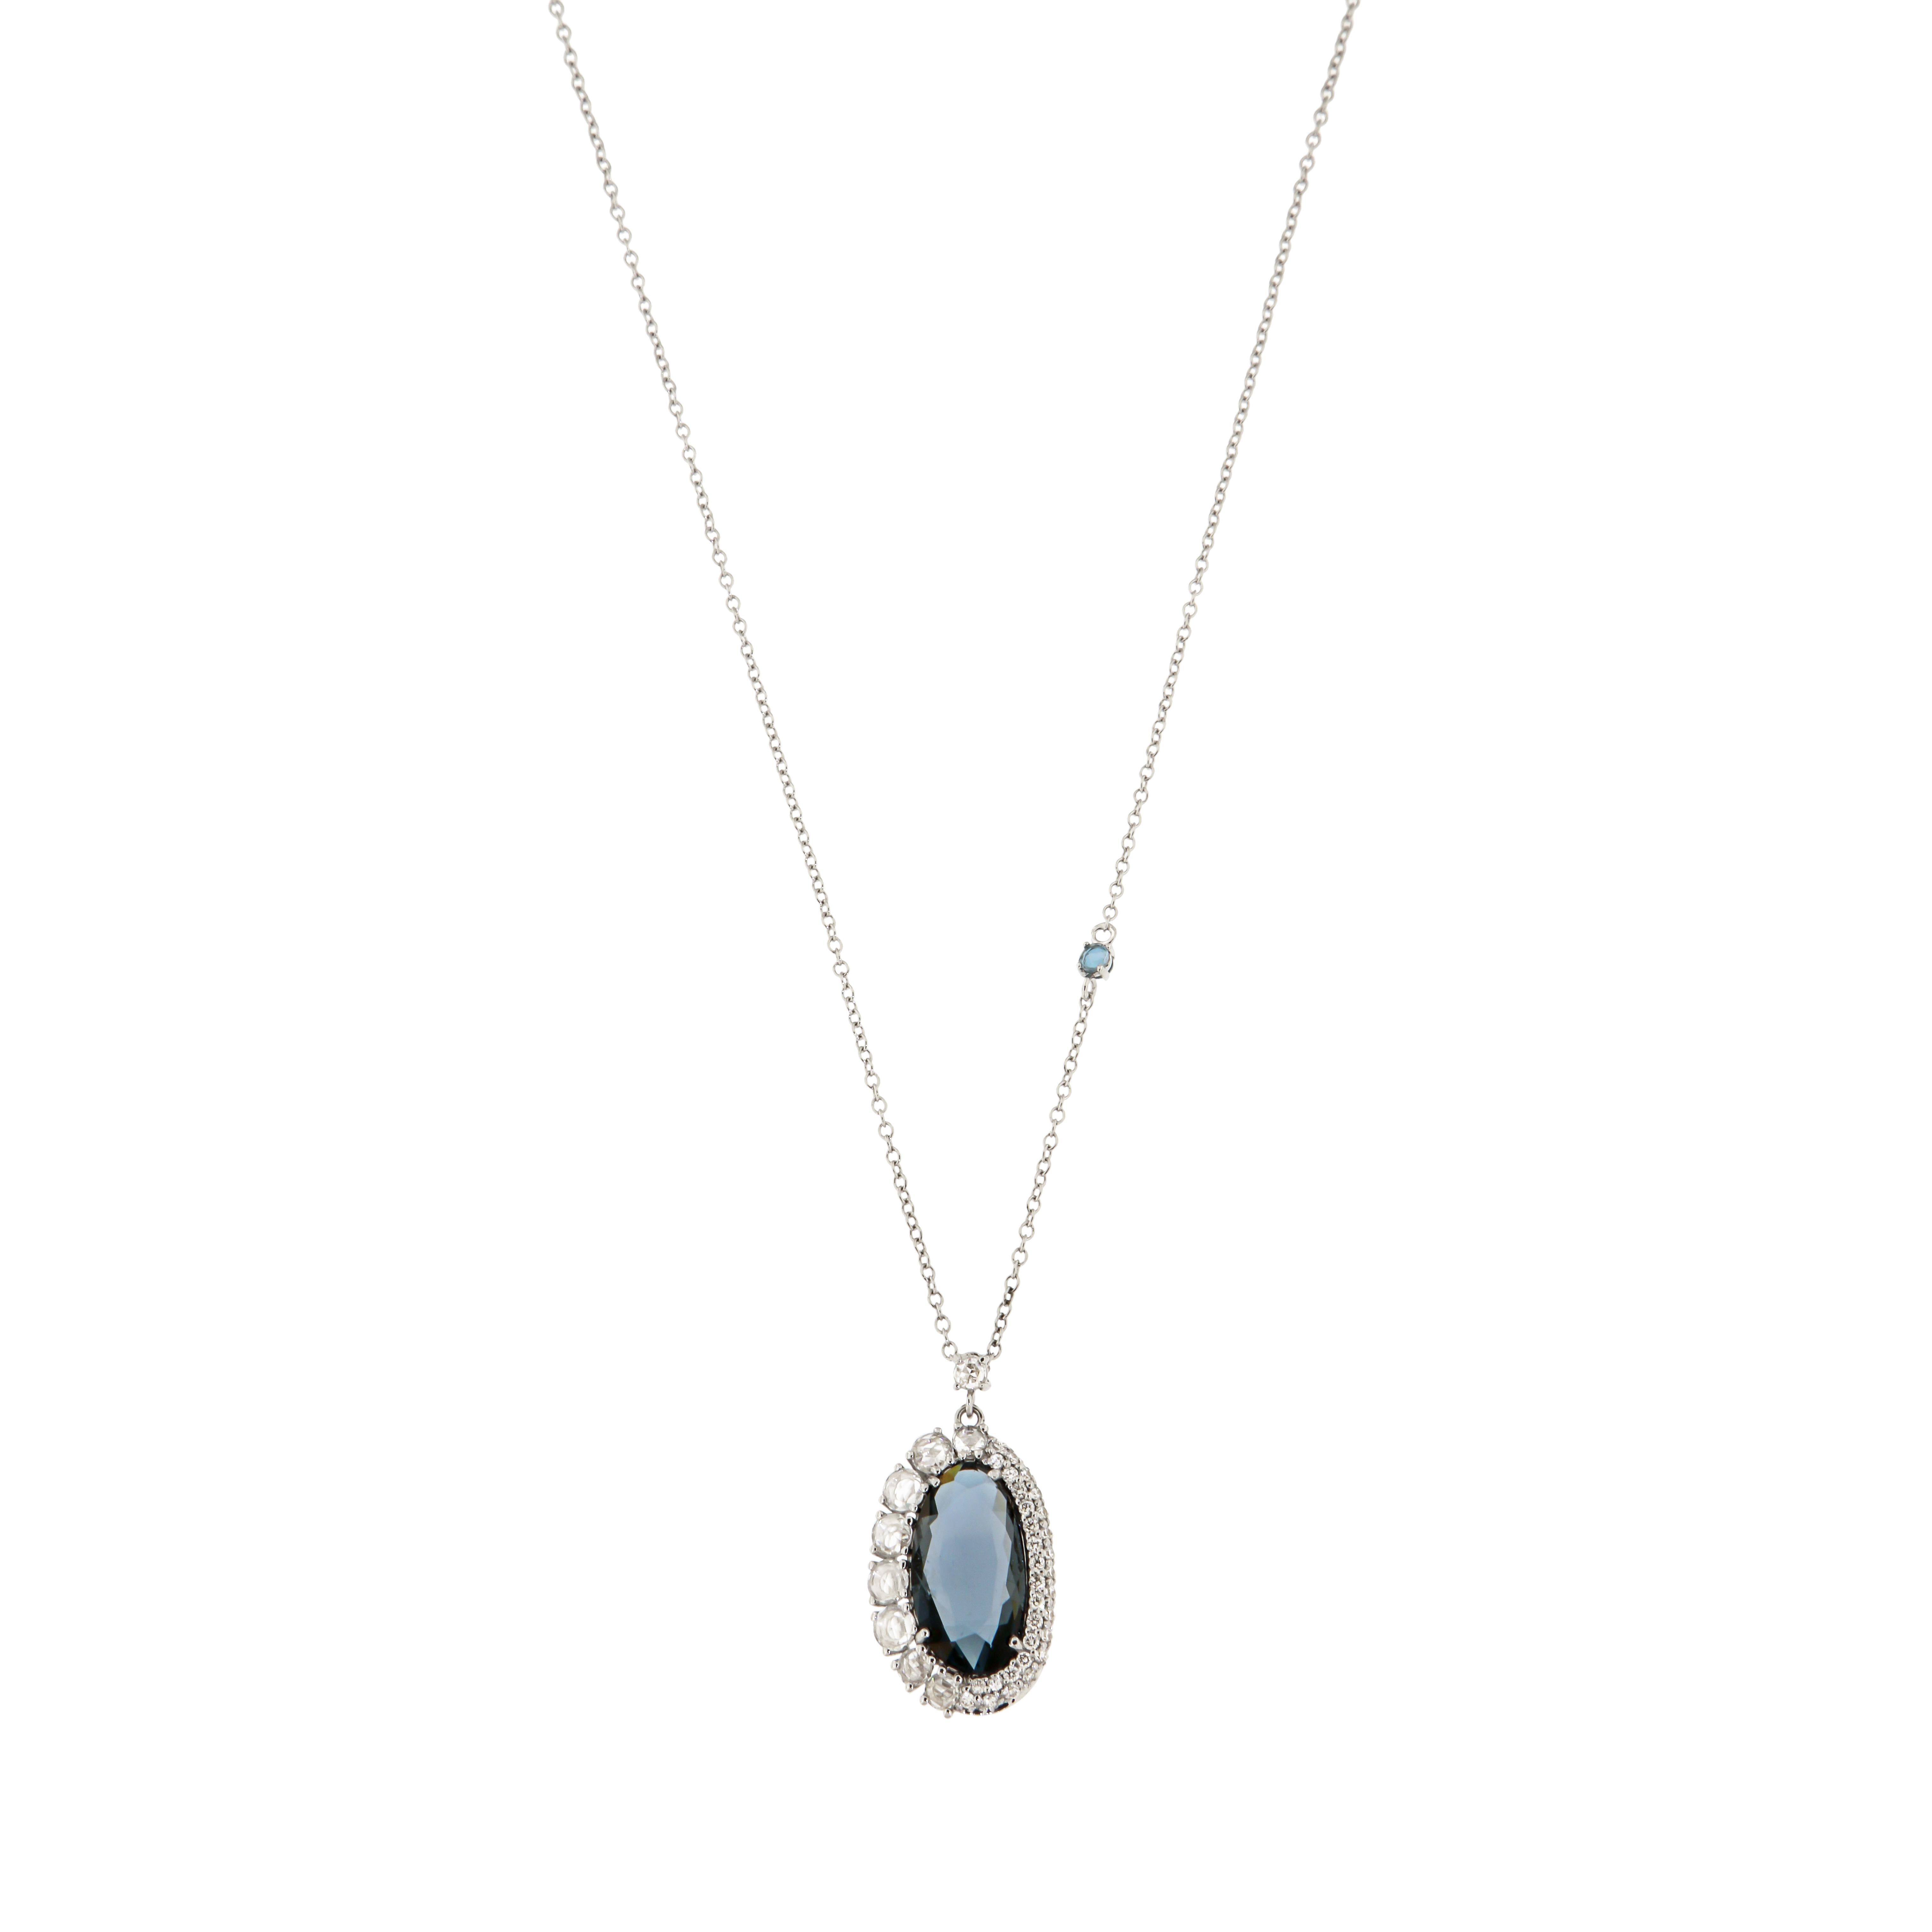 Earrings White Gold 18 K (Matching Ring and Necklace Available)
Diamond 0,86 ct
London Blue Topaz 

Weight 7.5 grams


With a heritage of ancient fine Swiss jewelry traditions, NATKINA is a Geneva based jewellery brand, which creates modern